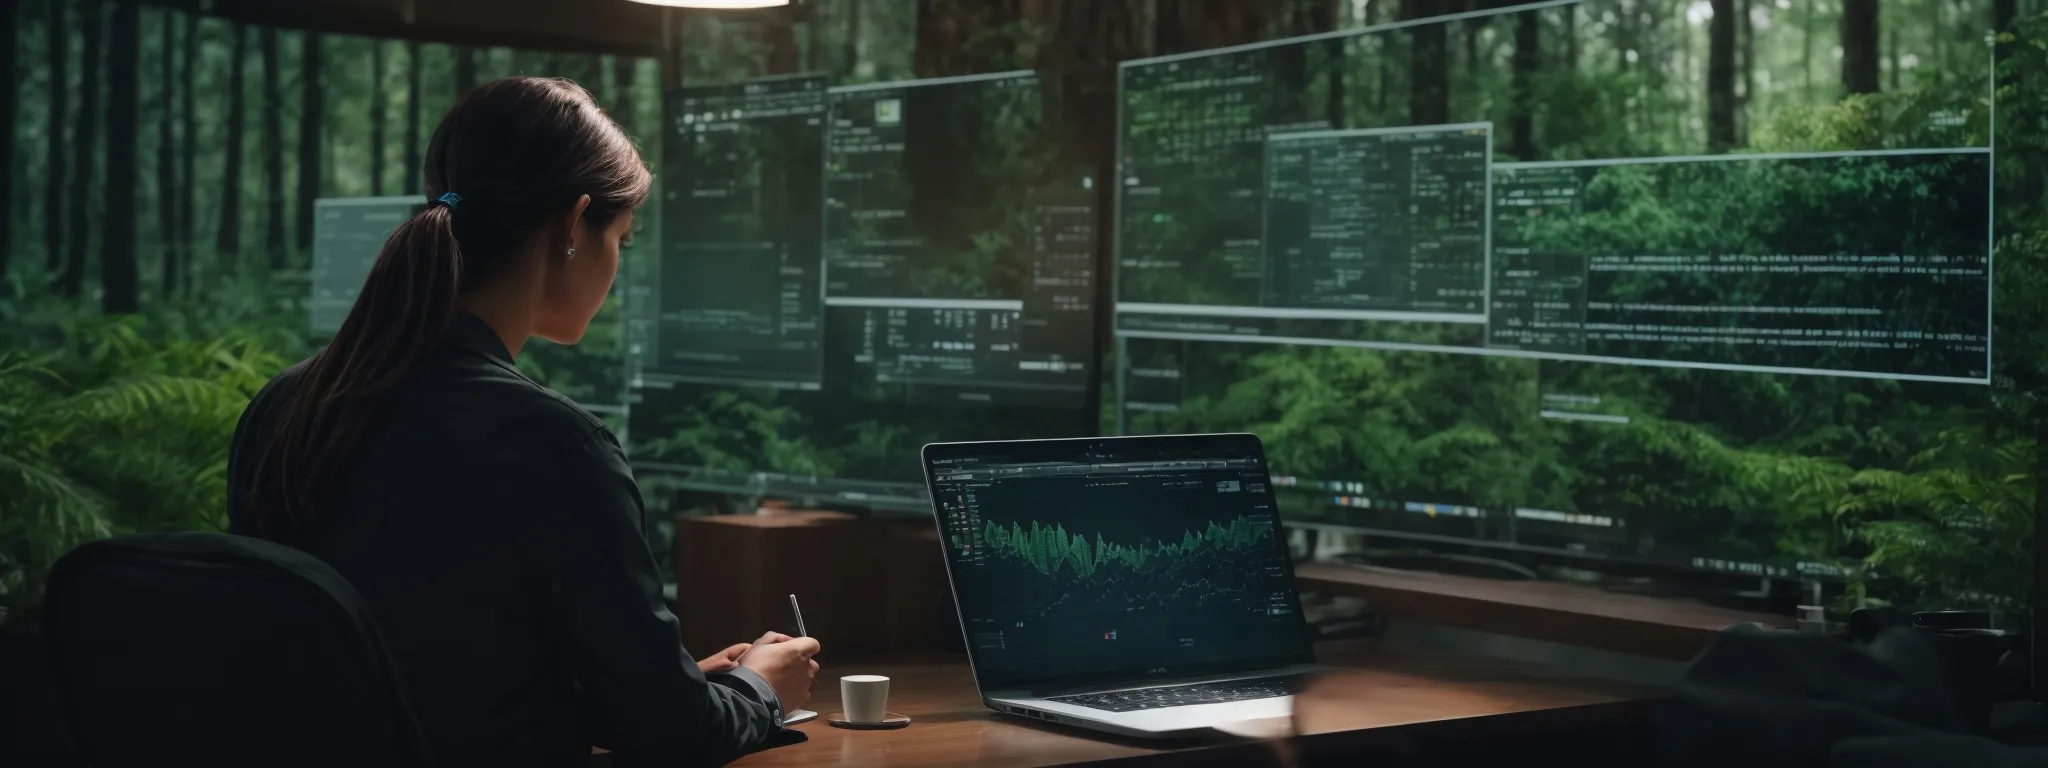 a person intently working on a laptop, with the wordpress dashboard visible on screen amidst a forest of digital icons representing analytics and optimization tools.